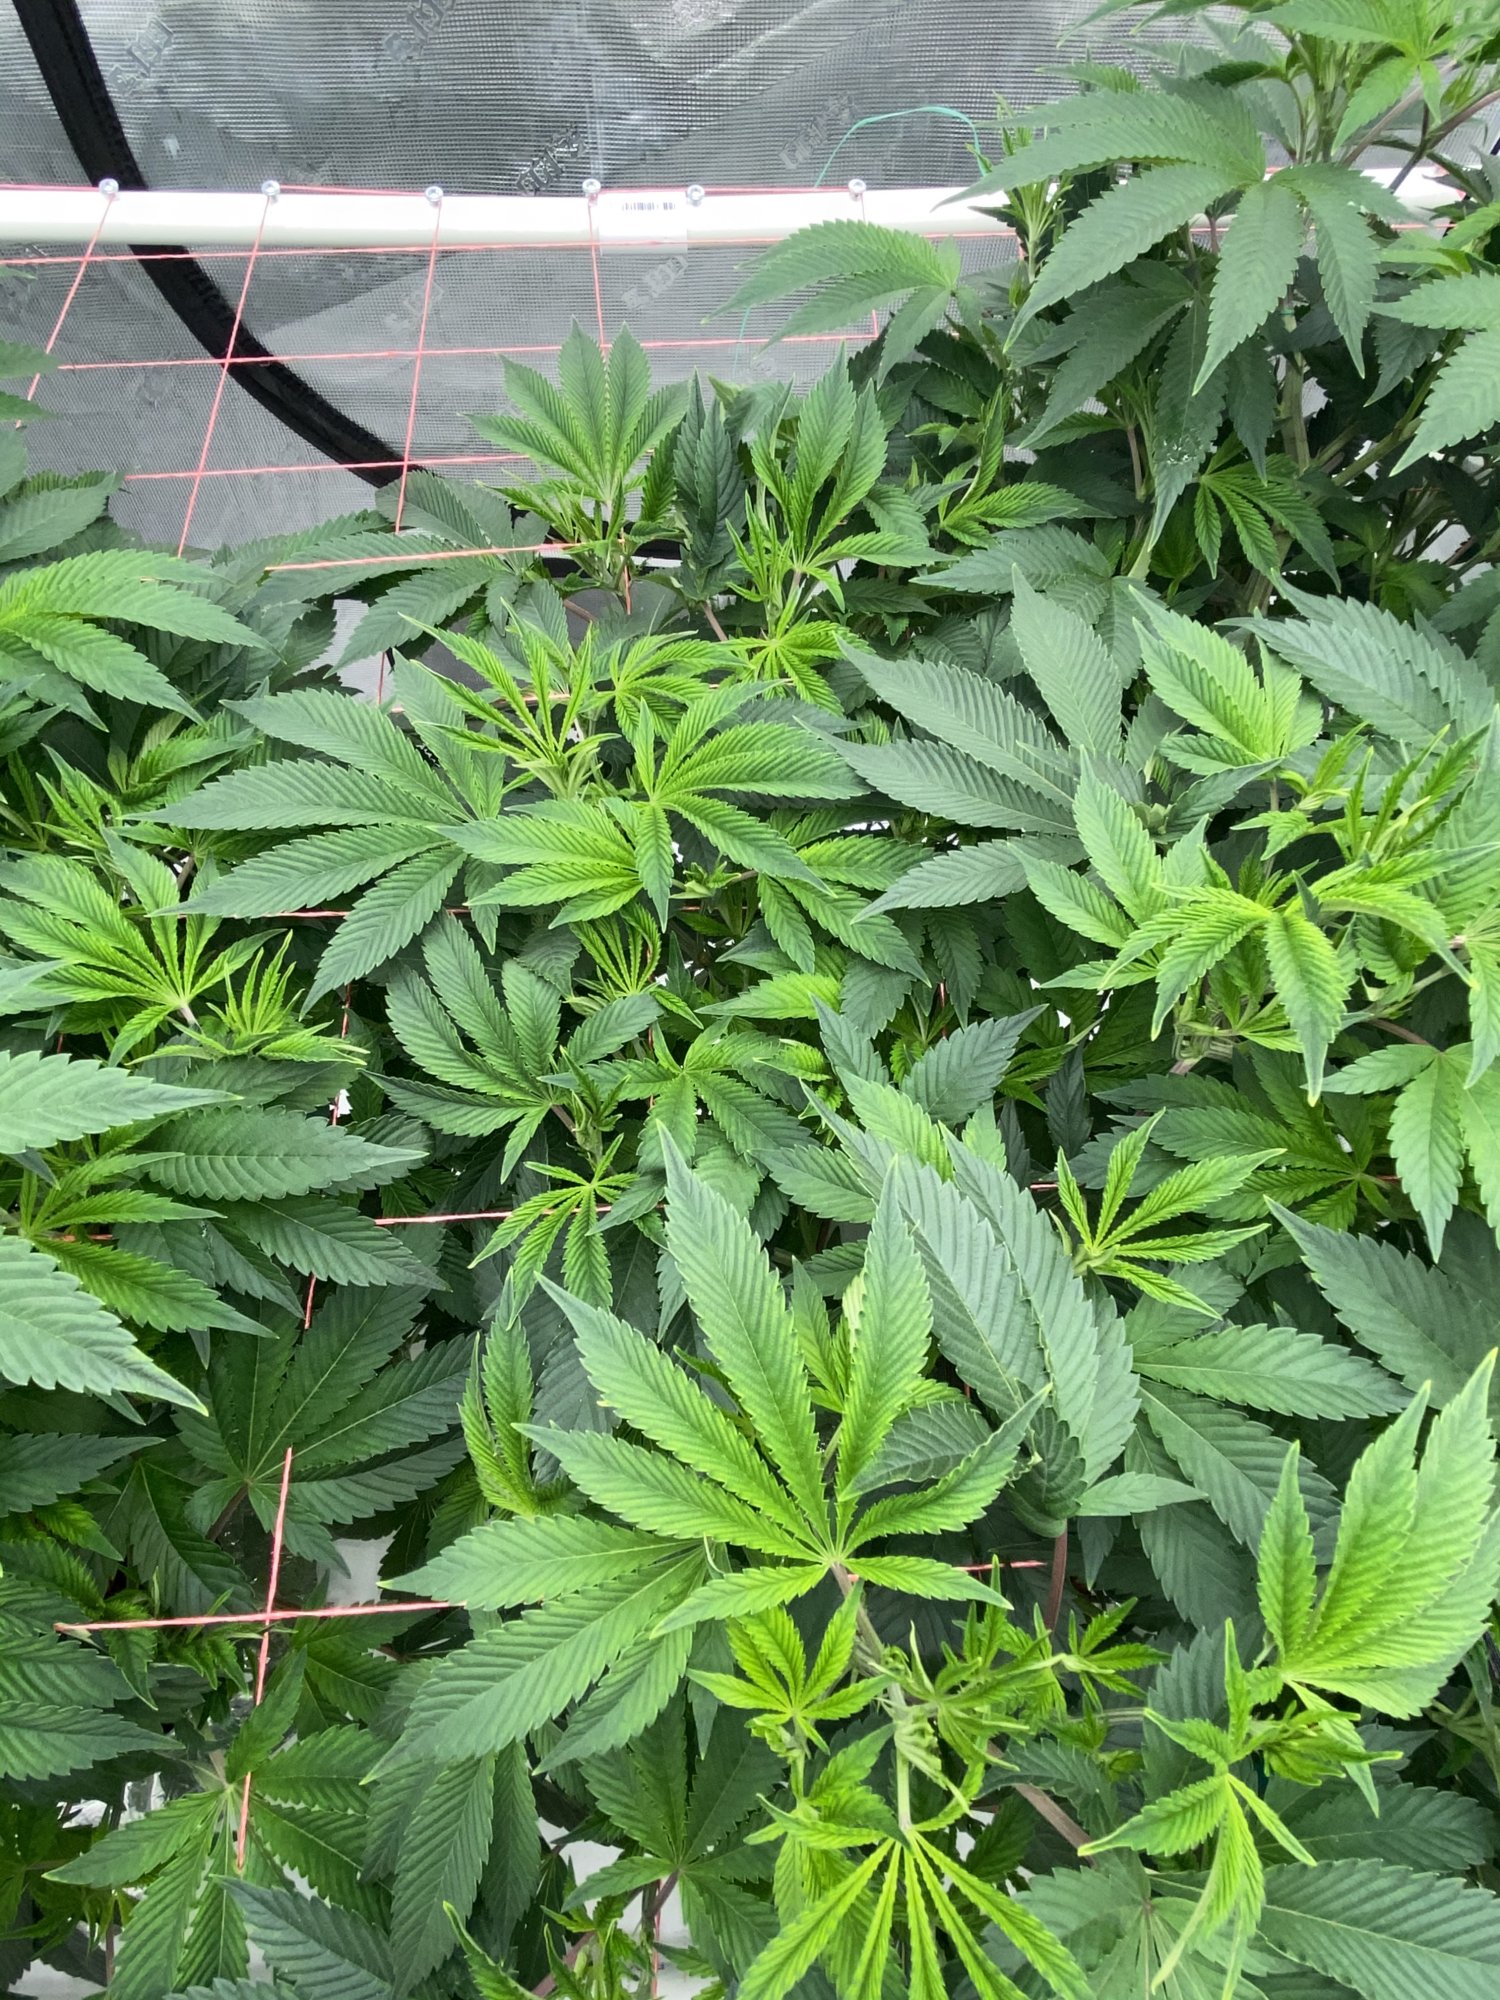 Please help me diagnose an issue in my dwc system 10